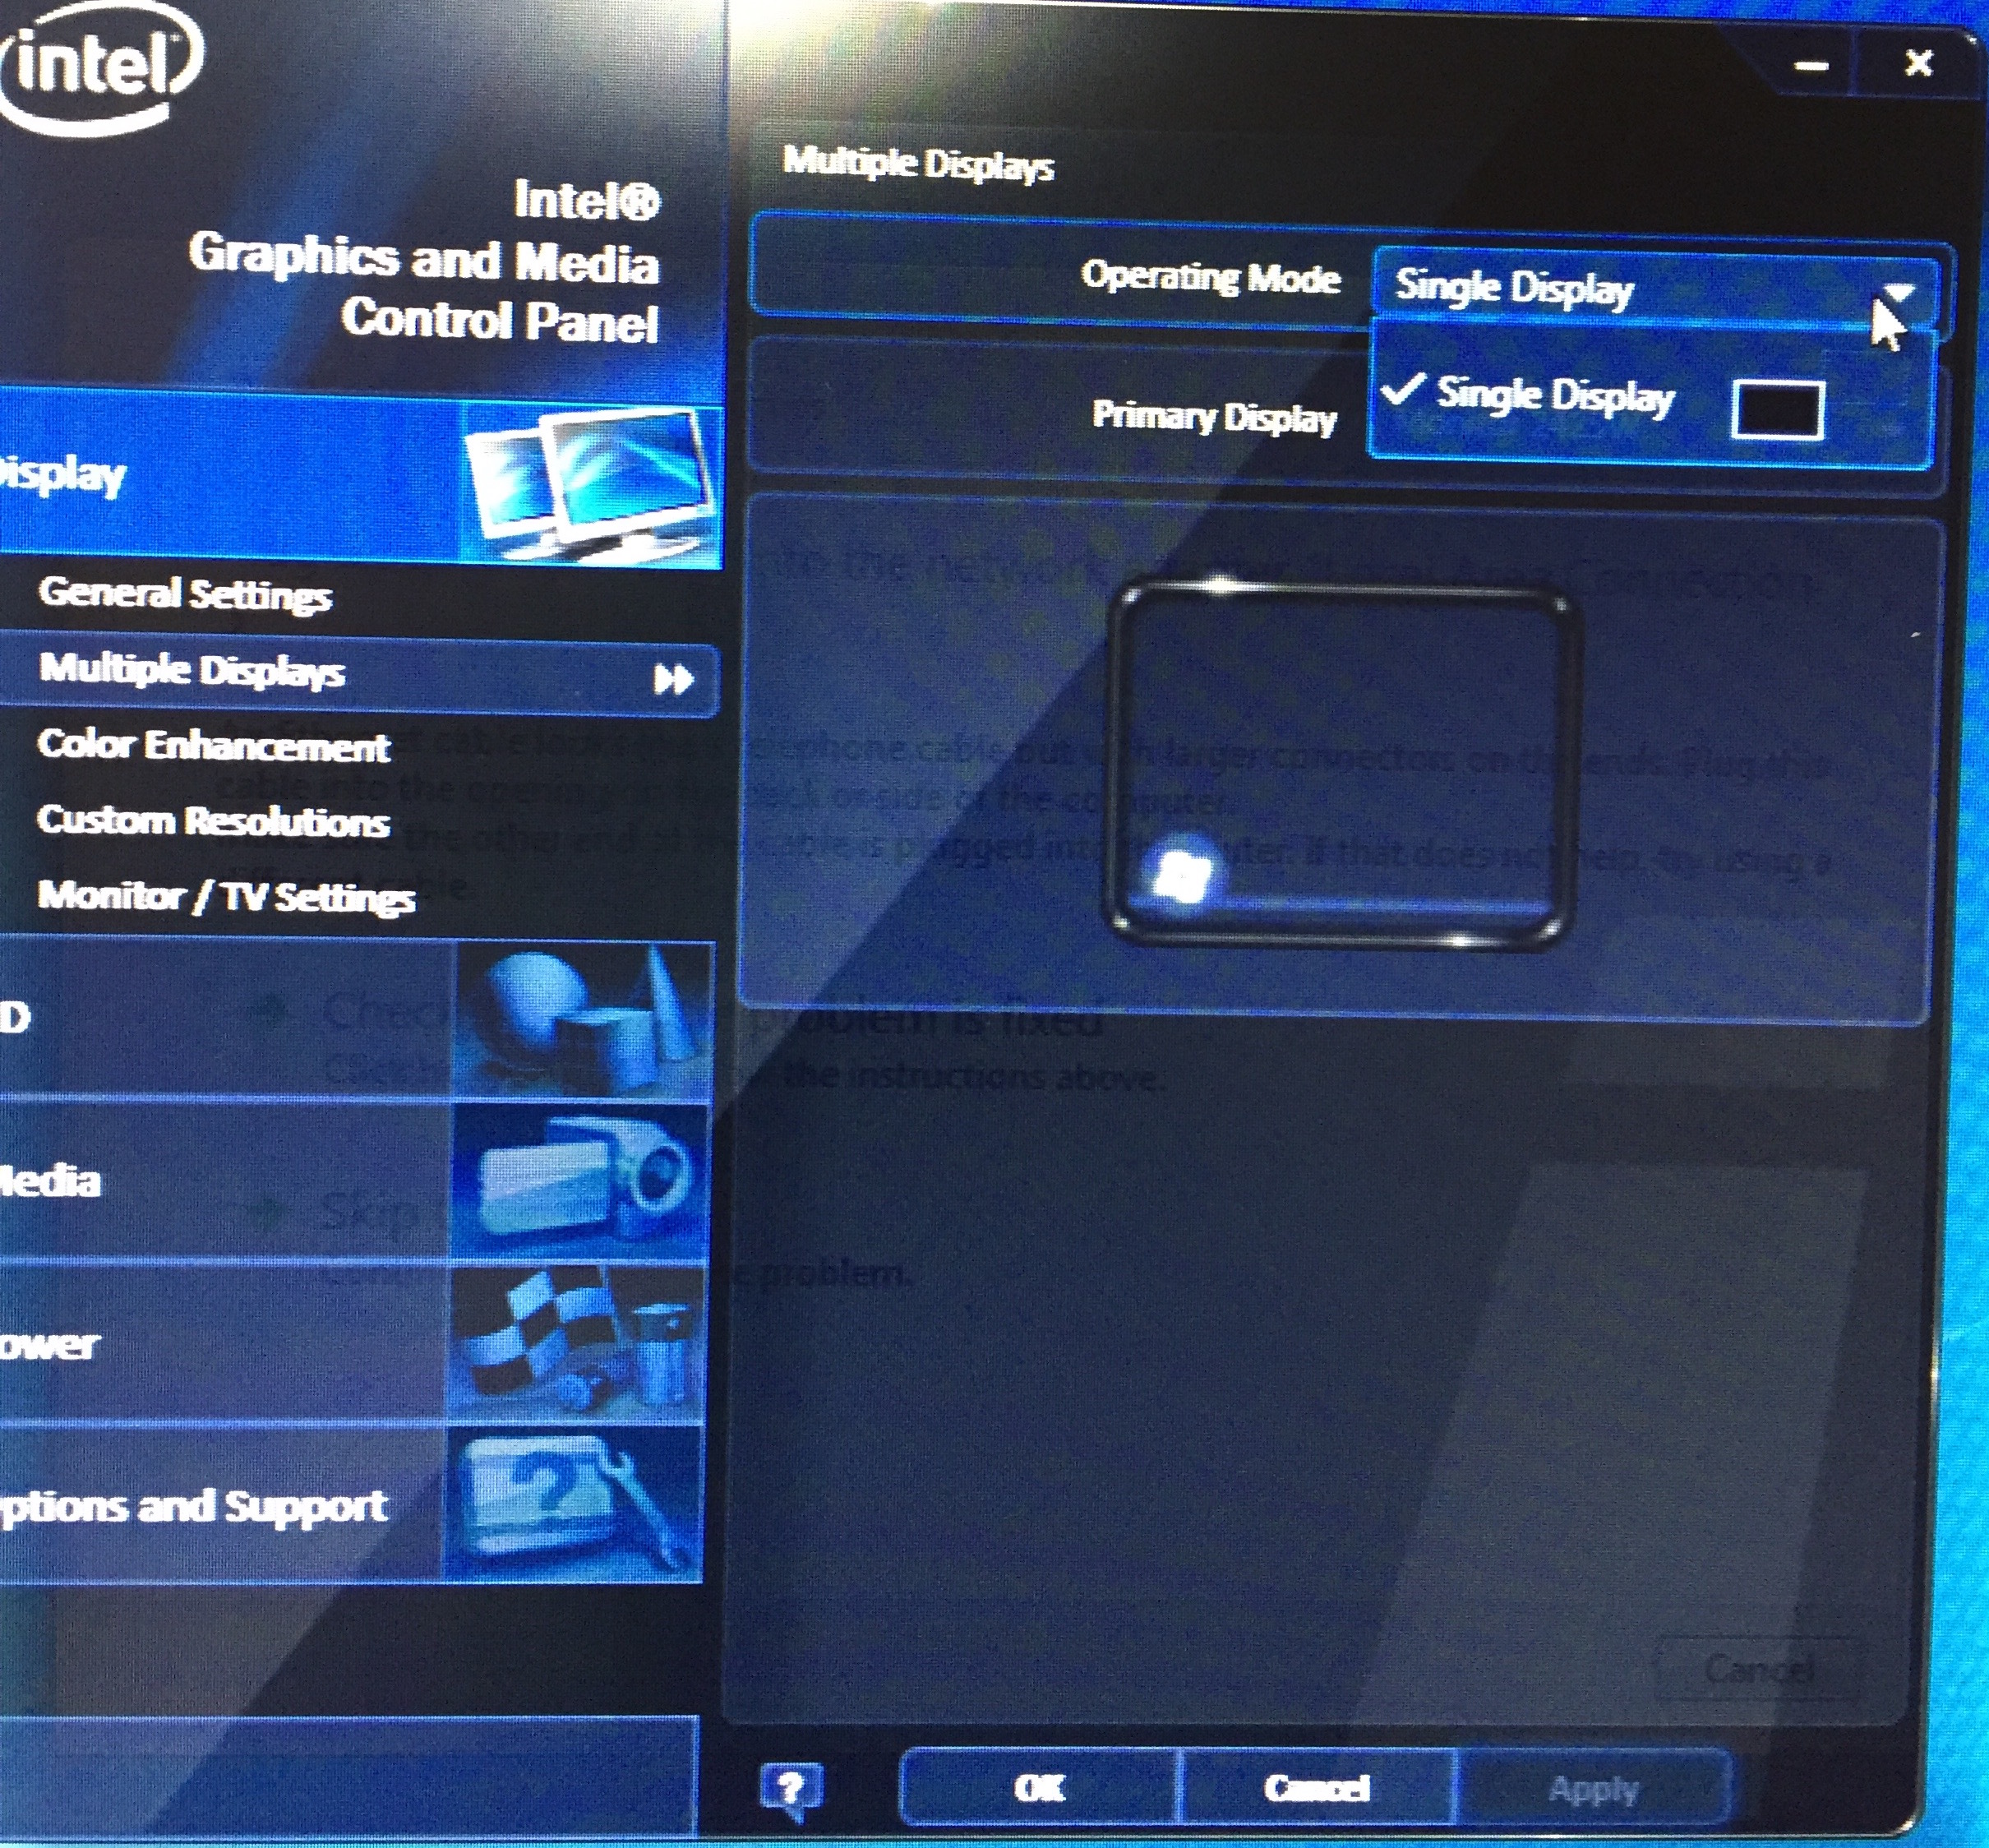 Trying to set up dual monitors with Intel Q45/Q43 Express Chipset - Intel  Communities